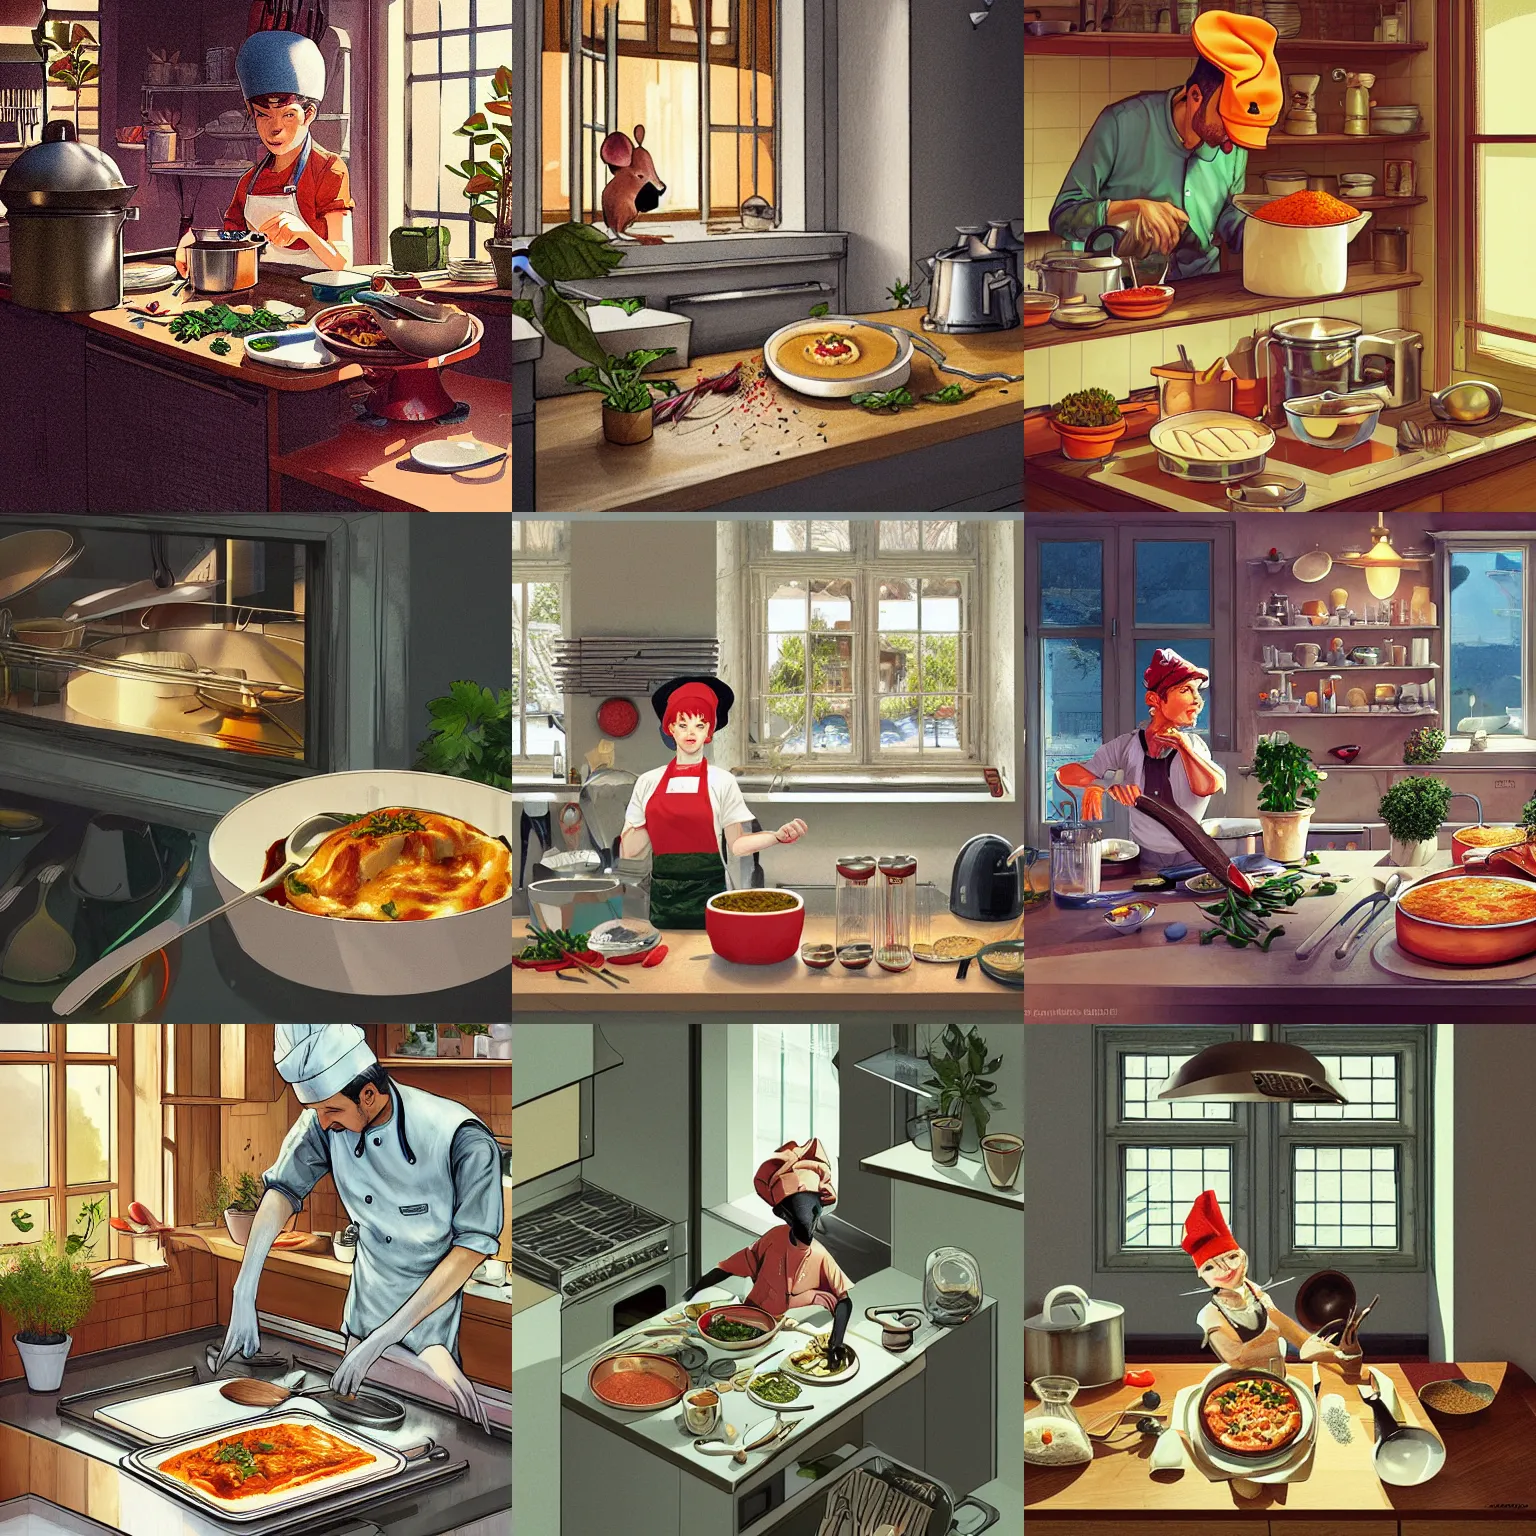 Prompt: mouse cooking lasagne in the kitchen, chef hat, spoon, pots, knifes, stove, kitchen counter, window, shelves, refrigerator, parsley, spices, plants, dramatic light, illustration by James Jean, Ilya Kuvshinov, Loish Van Baarle, highly detailed